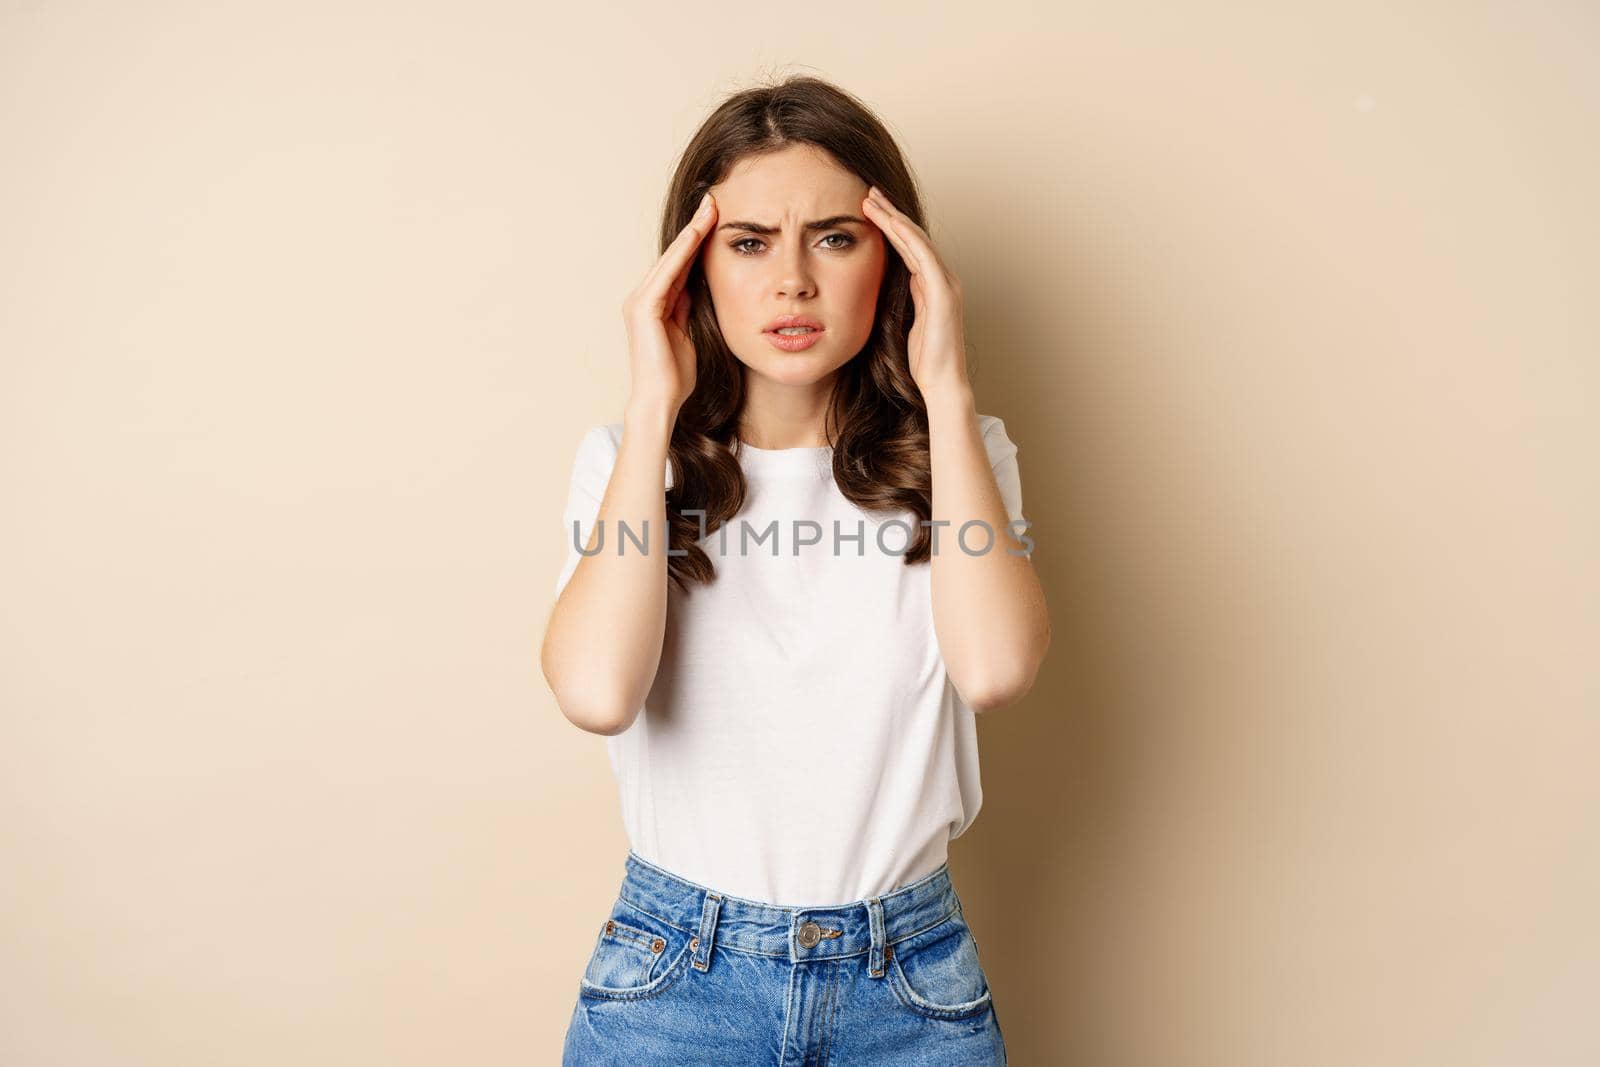 Health and women concept. Portrait of girl feeling sick, touching head temples, feeling headache, migraine, standing over beige background.